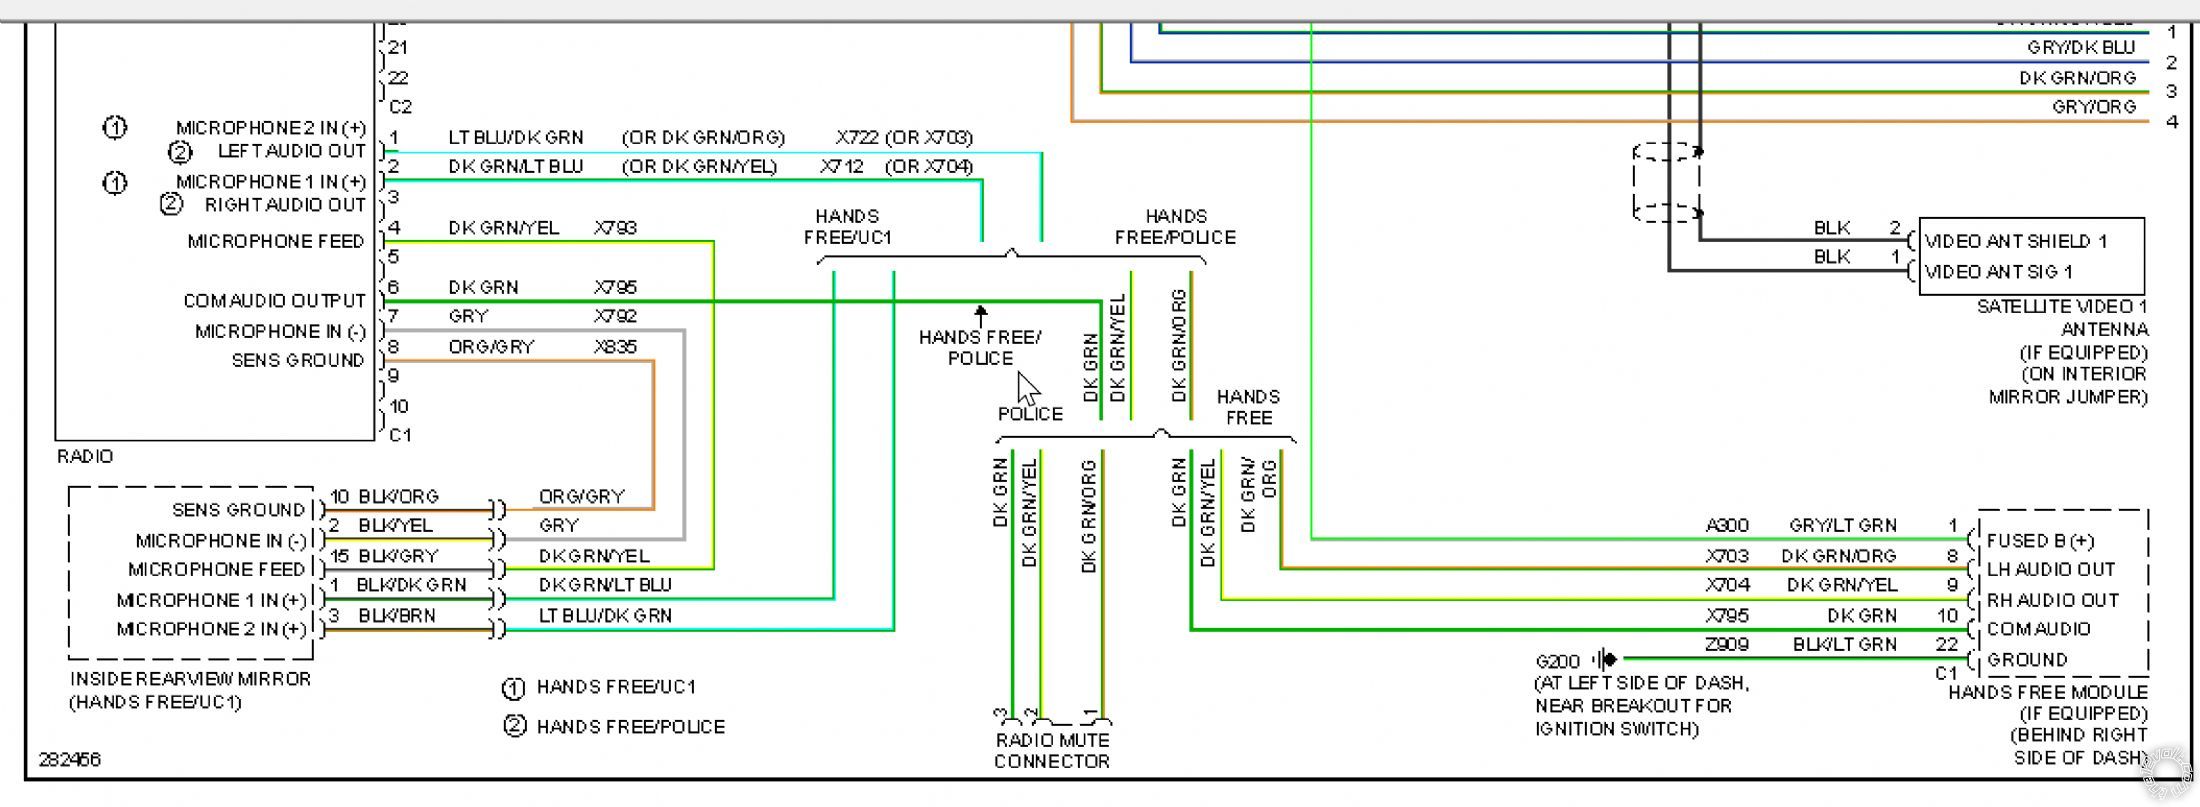 2008 Dodge Charger RT Radio Wiring Diagram -- posted image.